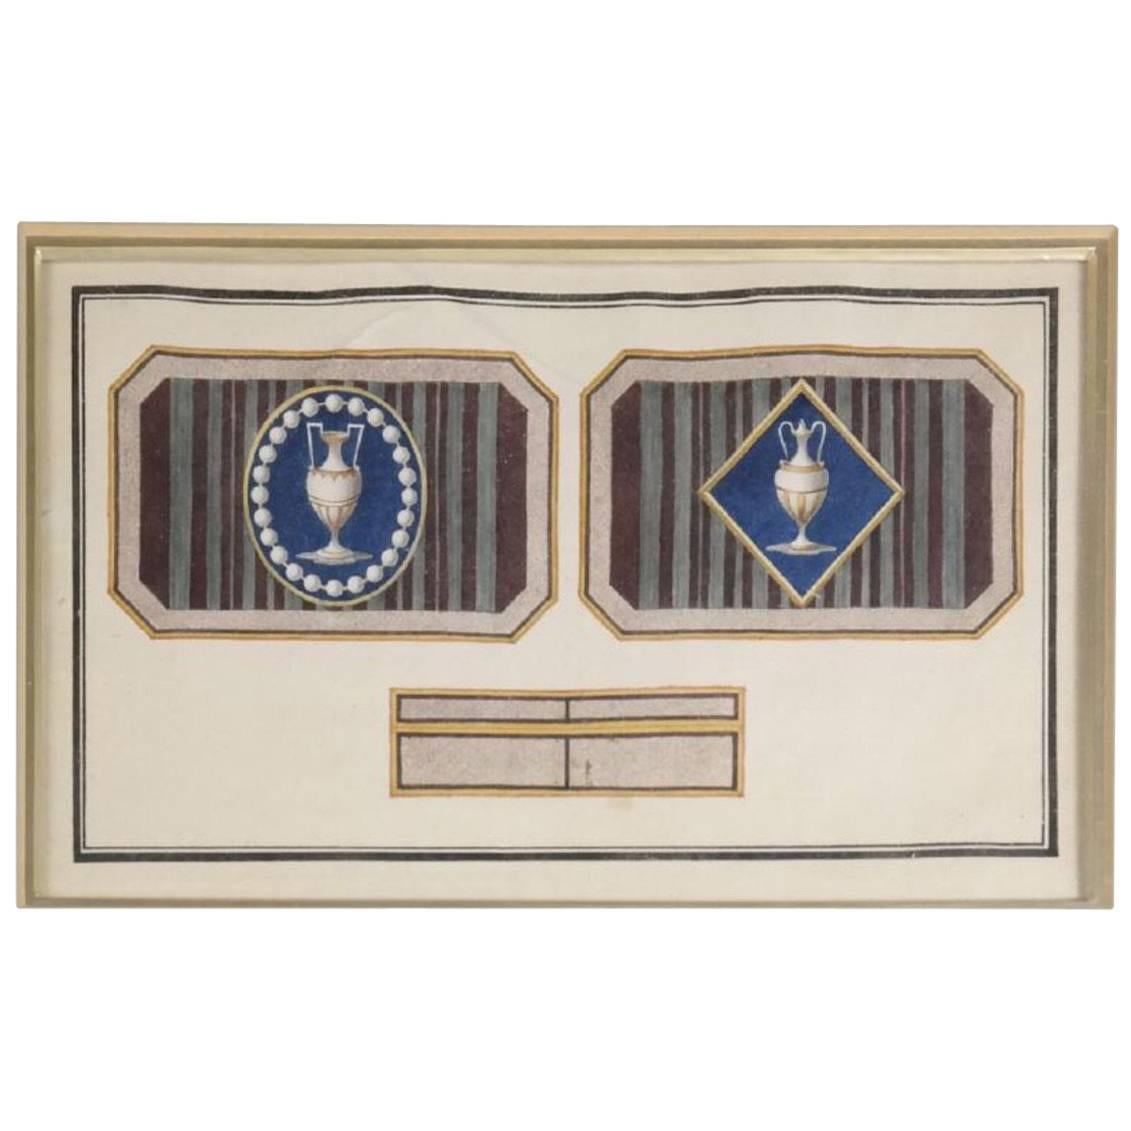 Watercolor Design for a Snuff Box, Possibly Italian or Swiss, Early 19th Century